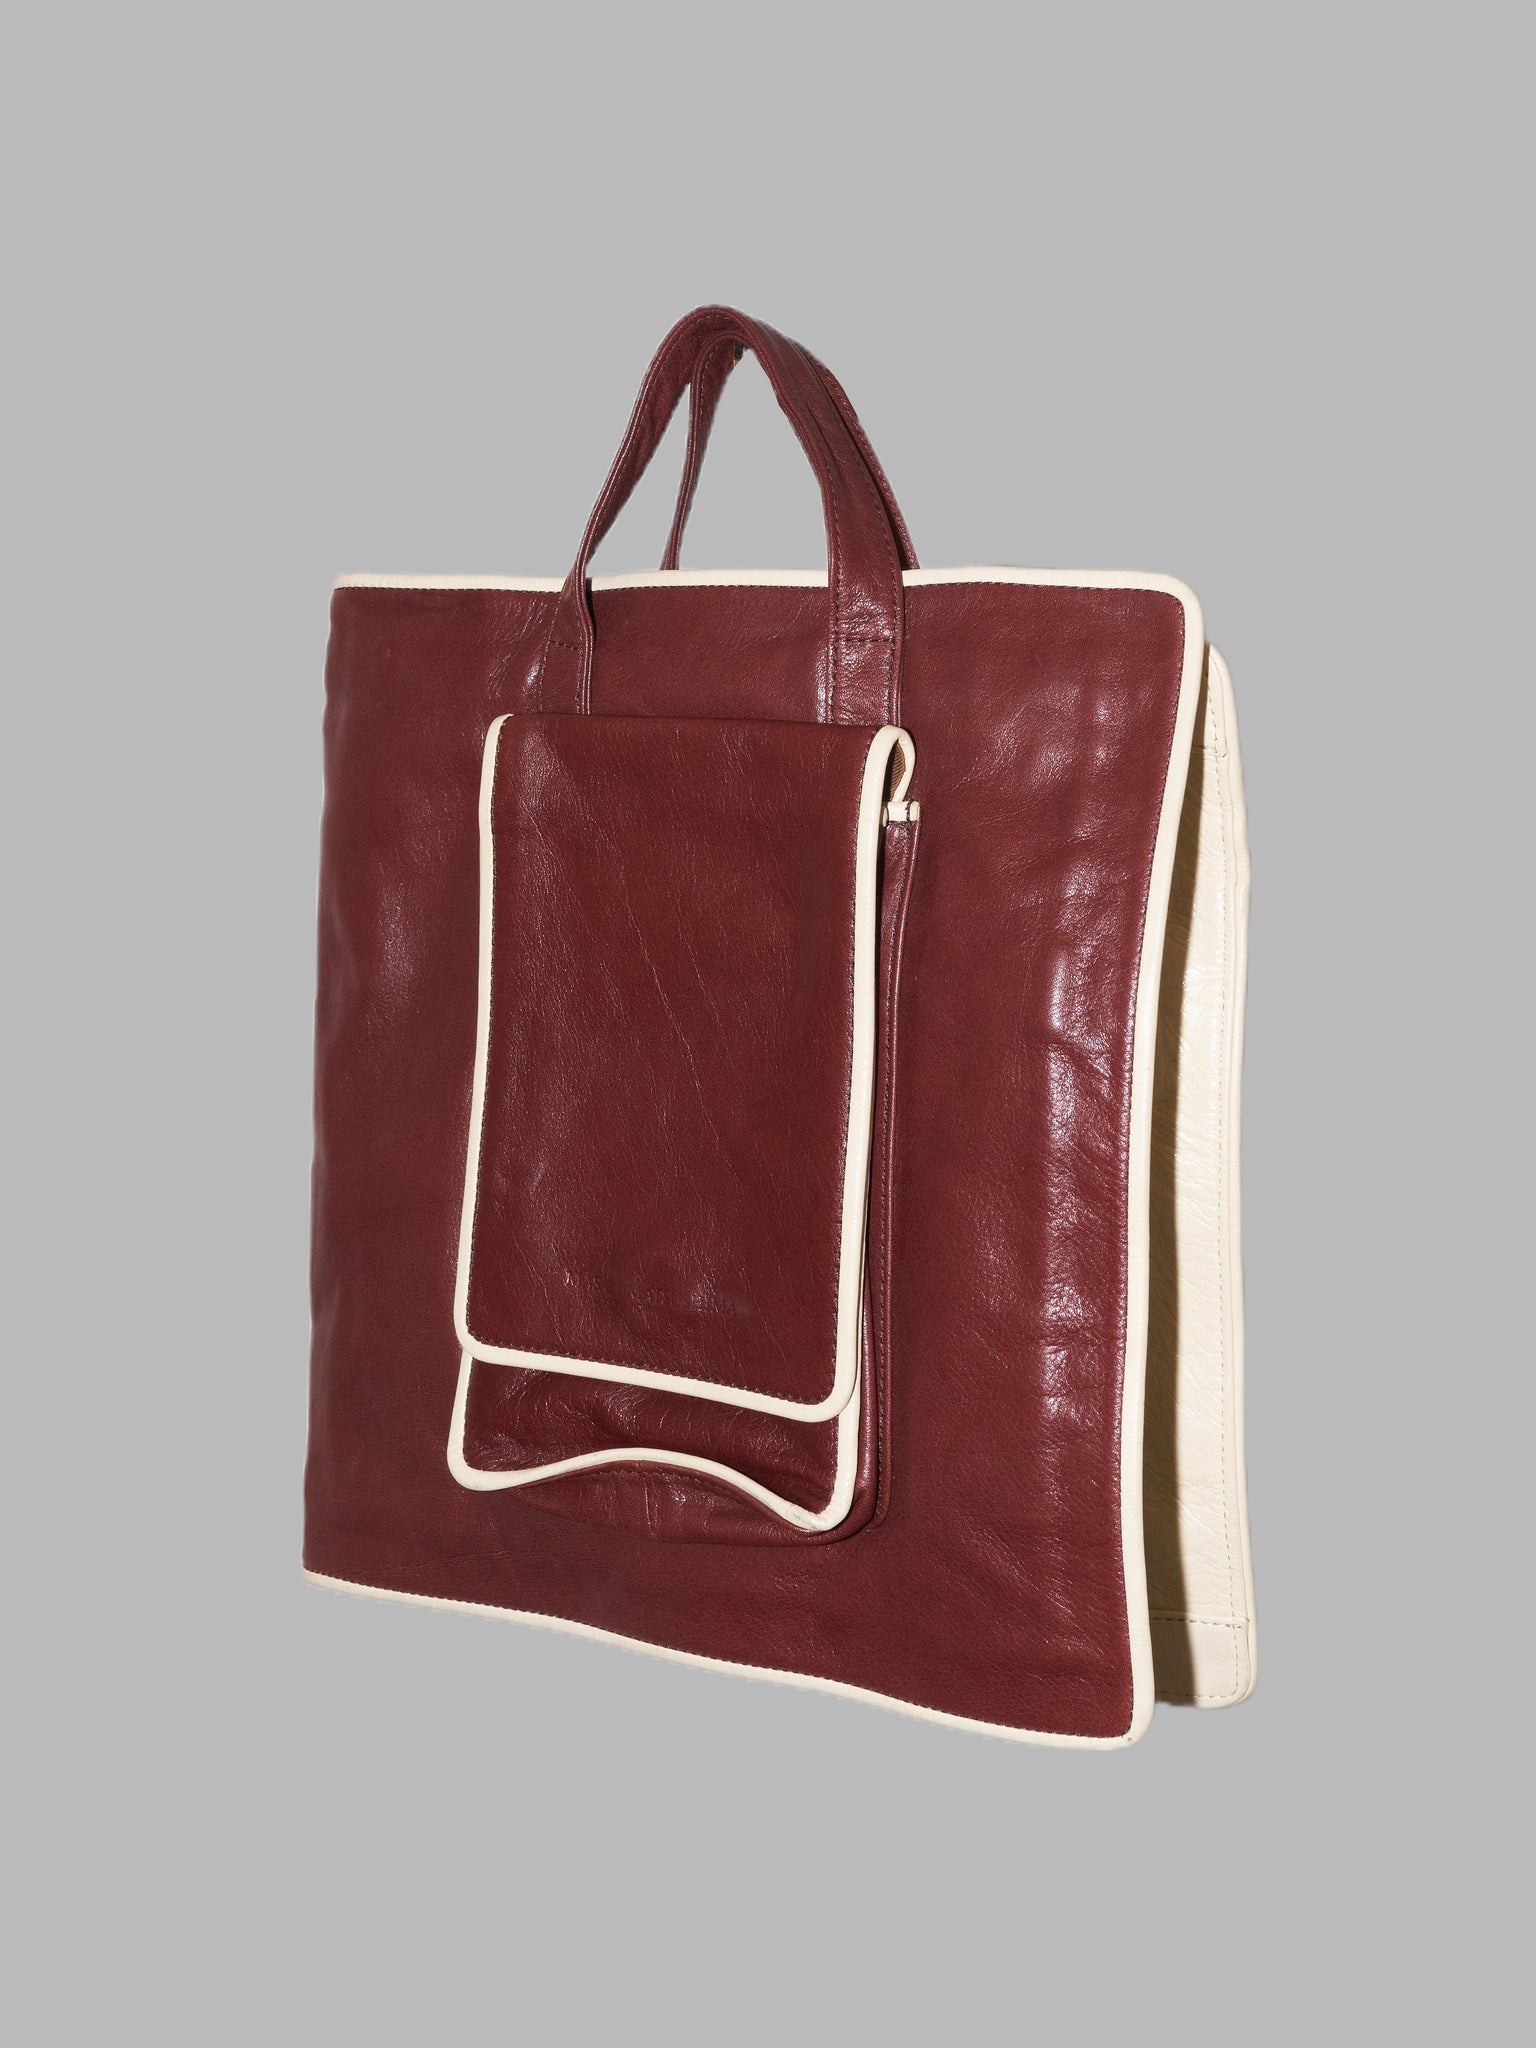 Masaki Matsushima Homme brown leather and canvas folded bag